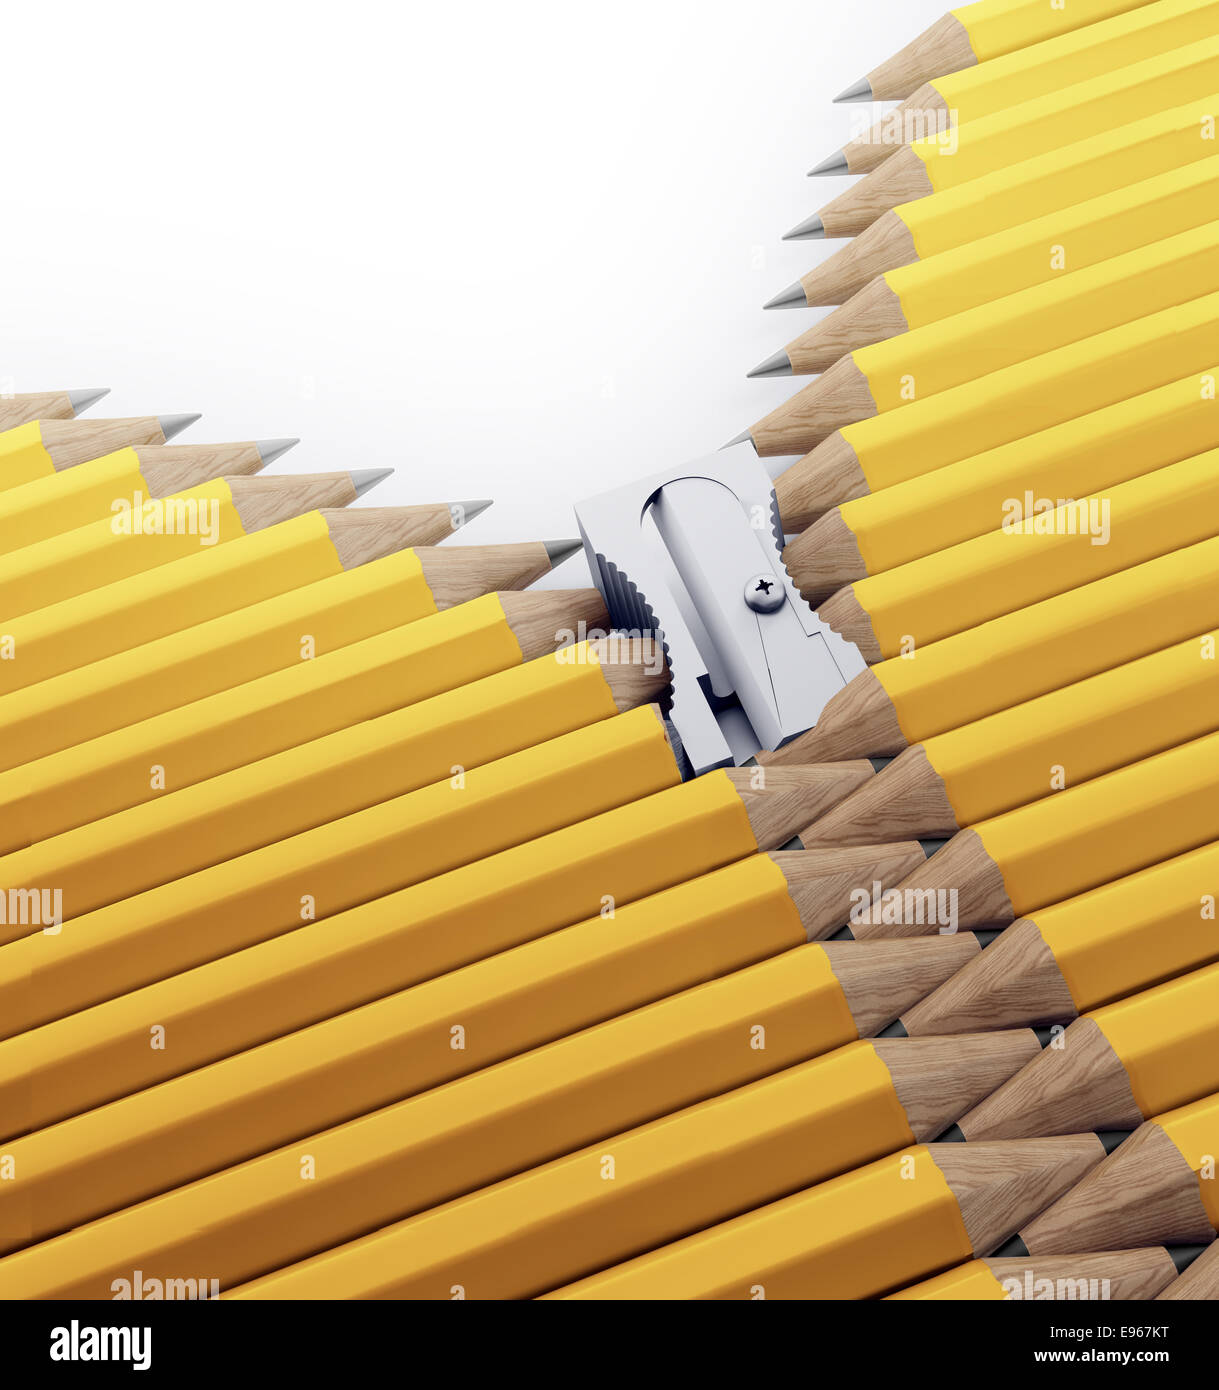 A row of pencils and sharpener forming a zipper - arts, creativity and school illustration Stock Photo